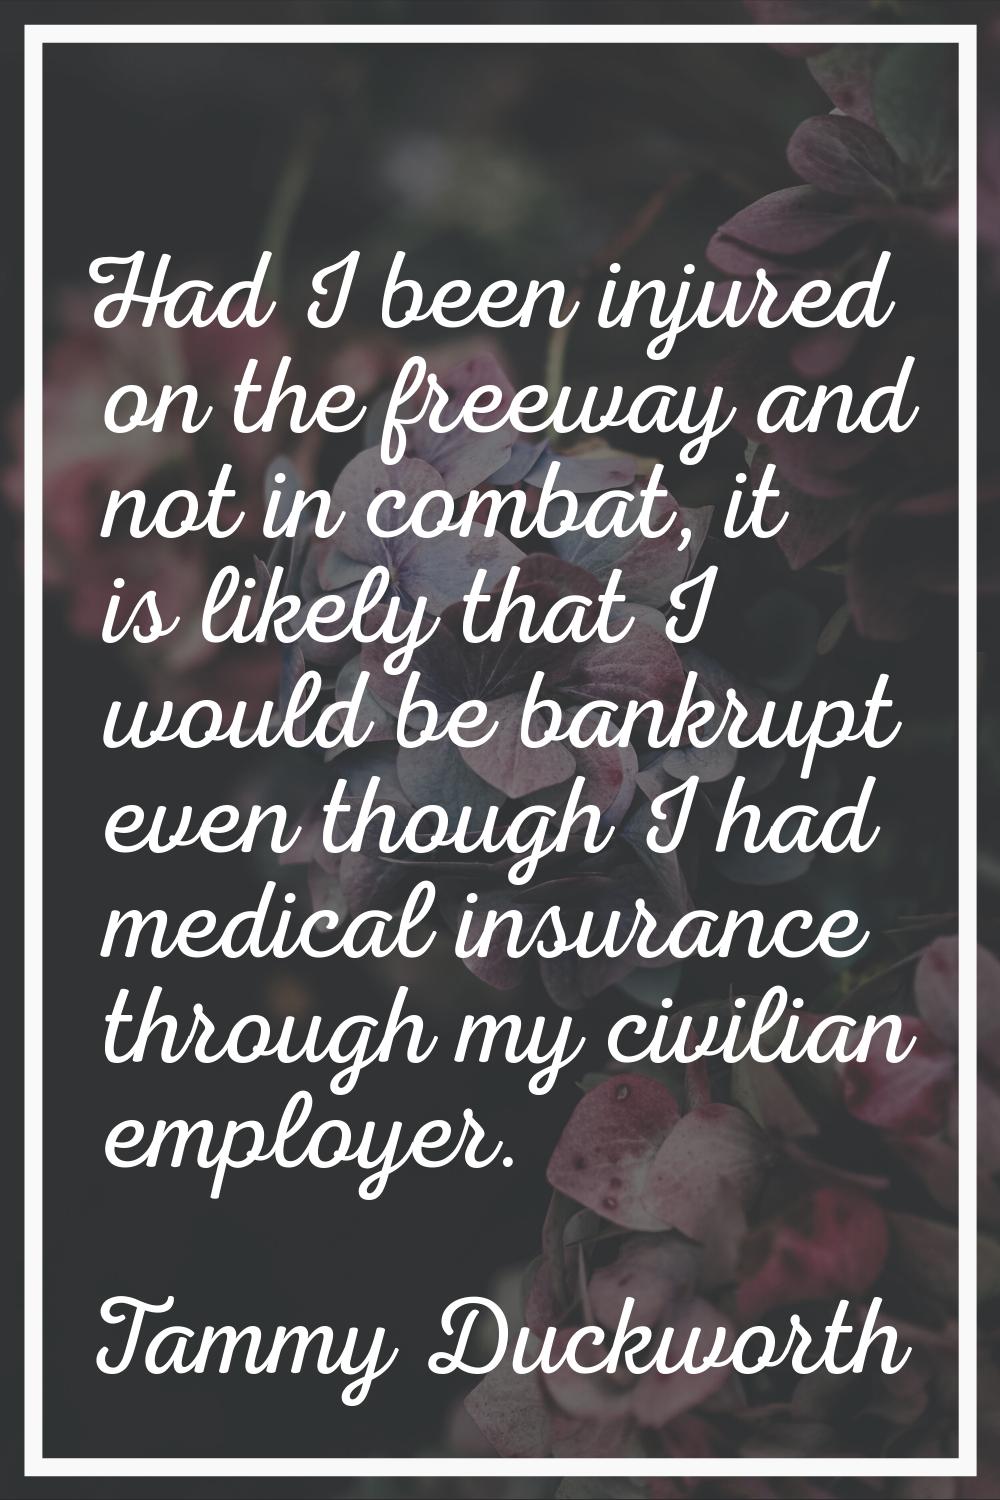 Had I been injured on the freeway and not in combat, it is likely that I would be bankrupt even tho